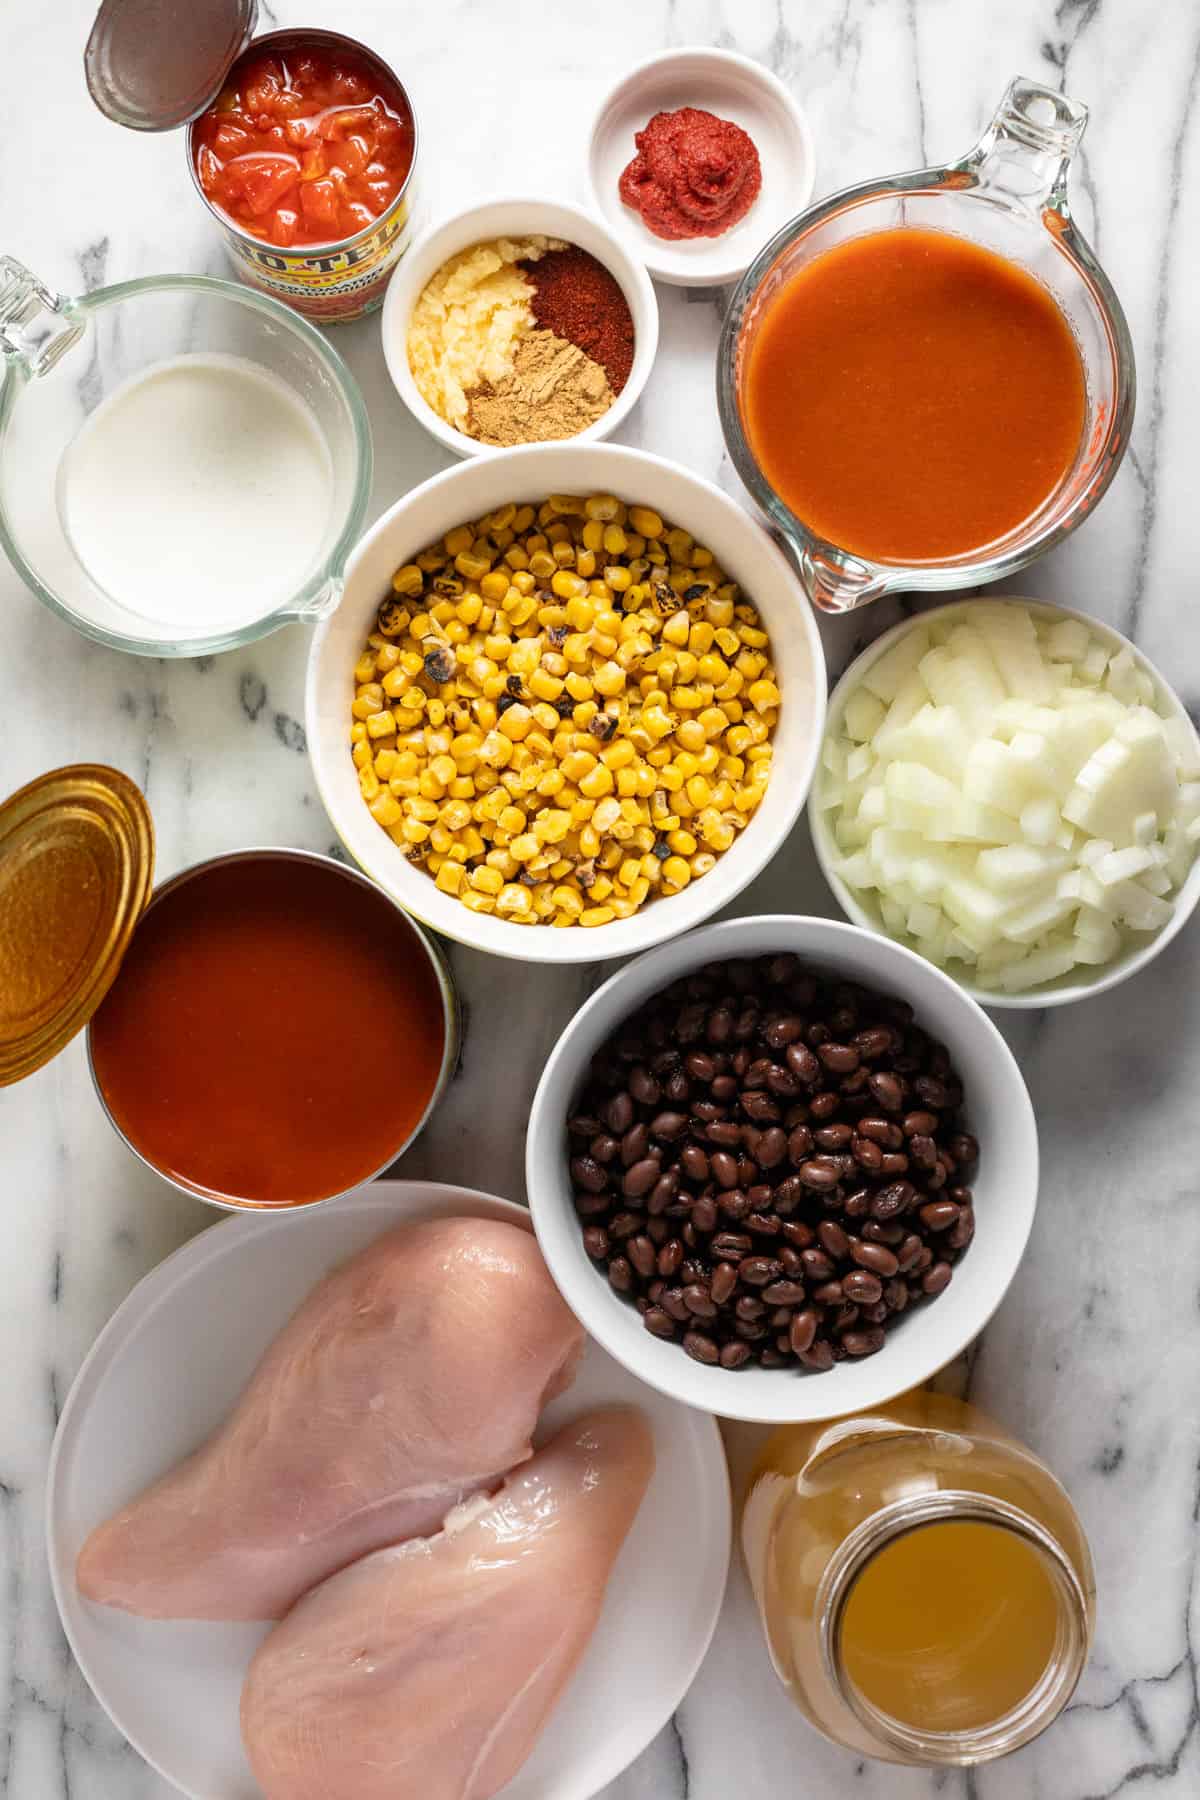 Bowls of ingredients to make creamy chicken enchilada soup.